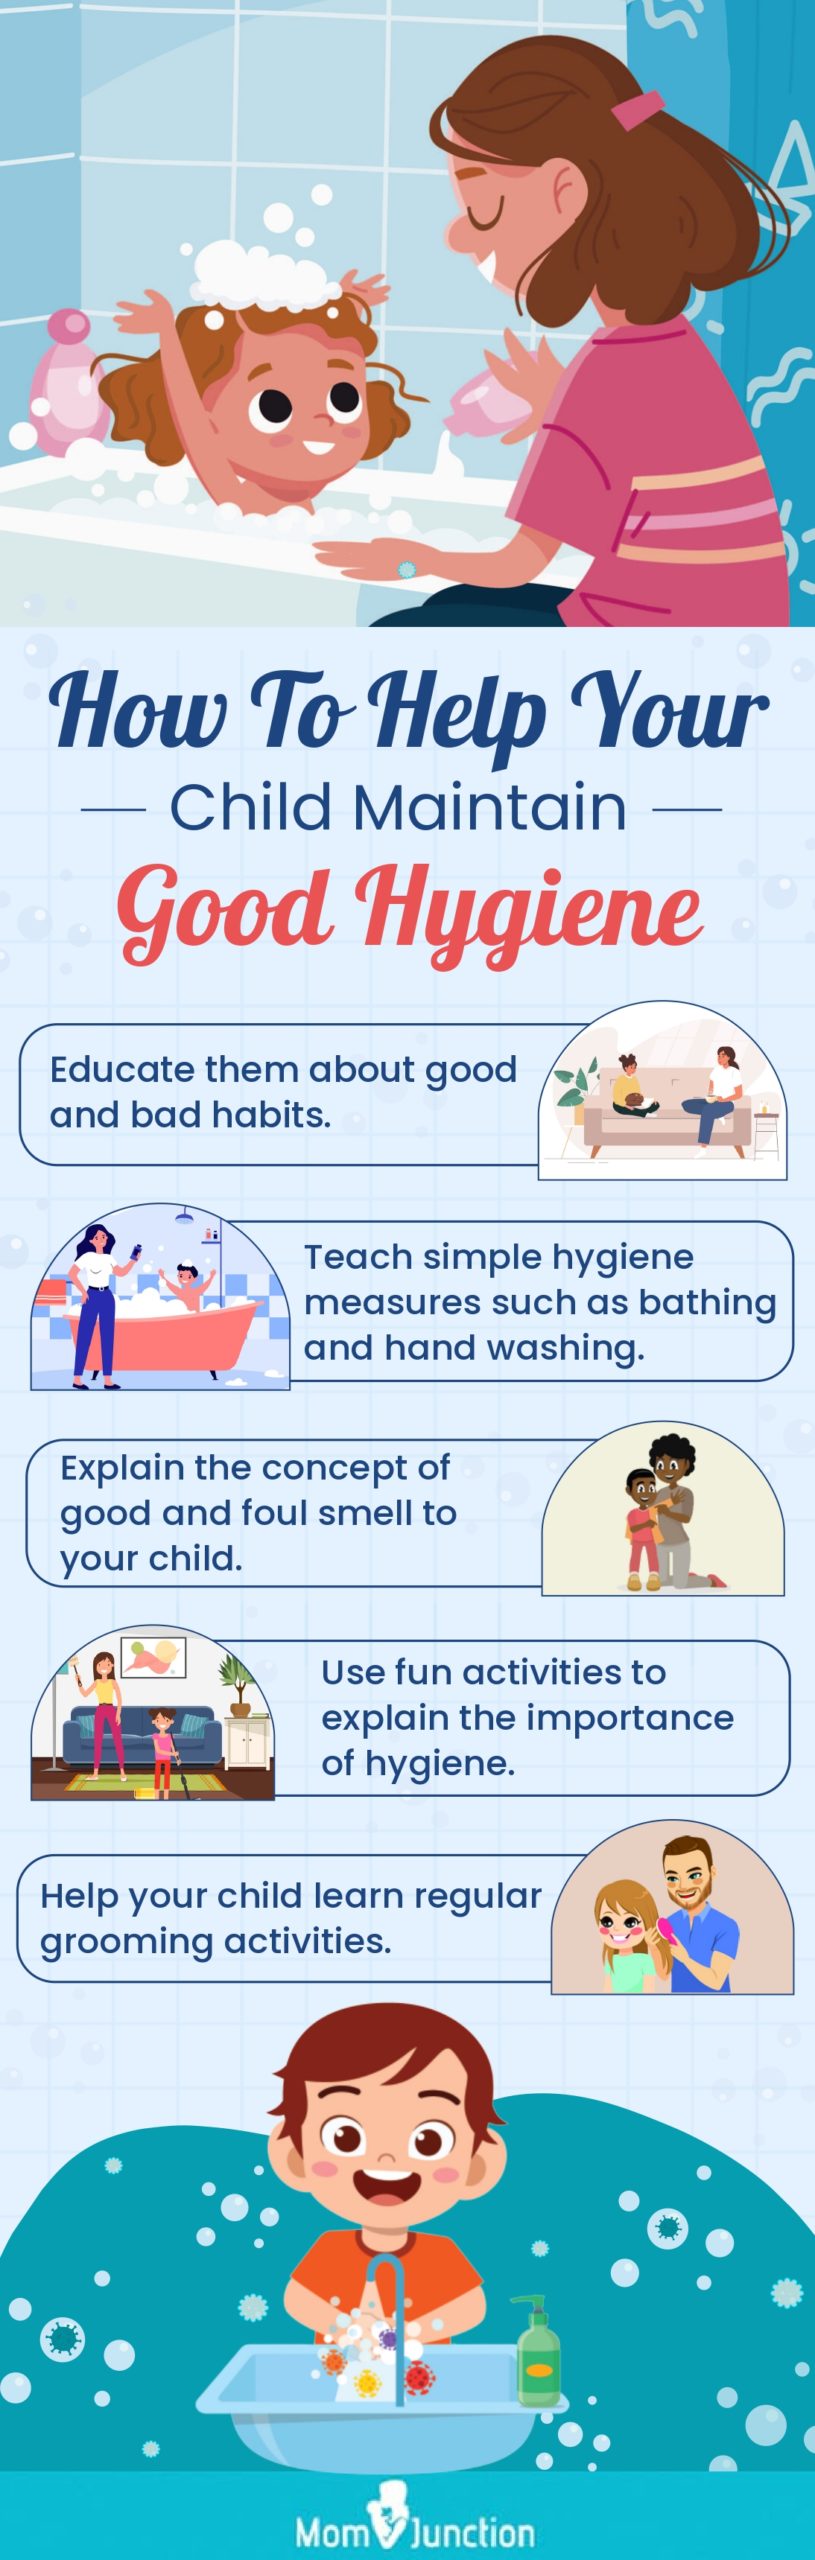 why is it important to maintain good personal hygiene